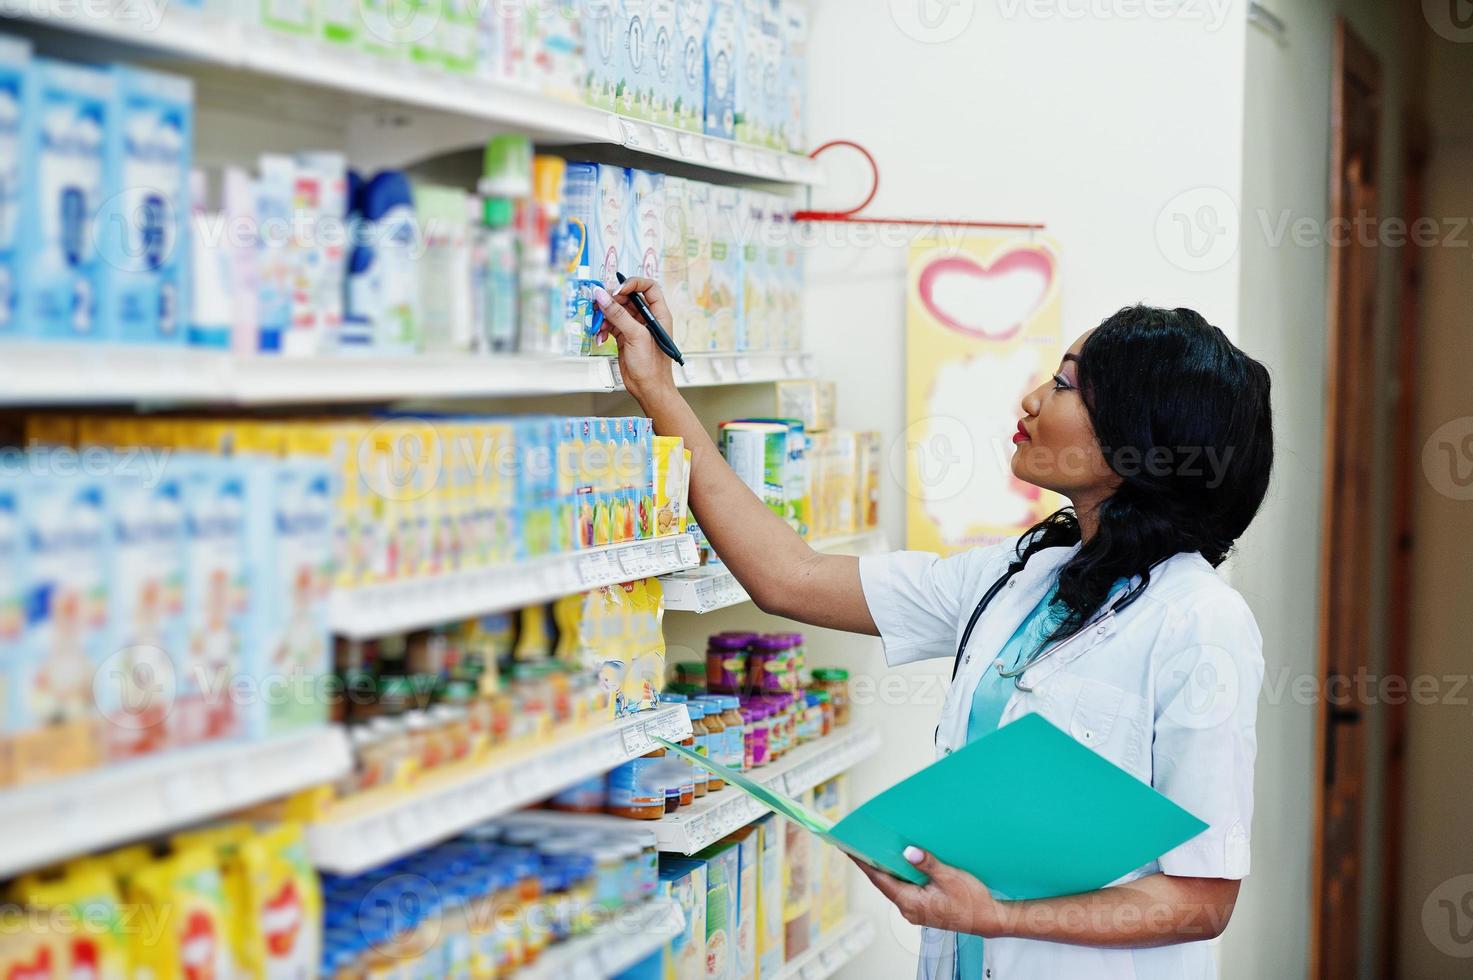 African american pharmacist working in drugstore at hospital pharmacy. African healthcare. photo